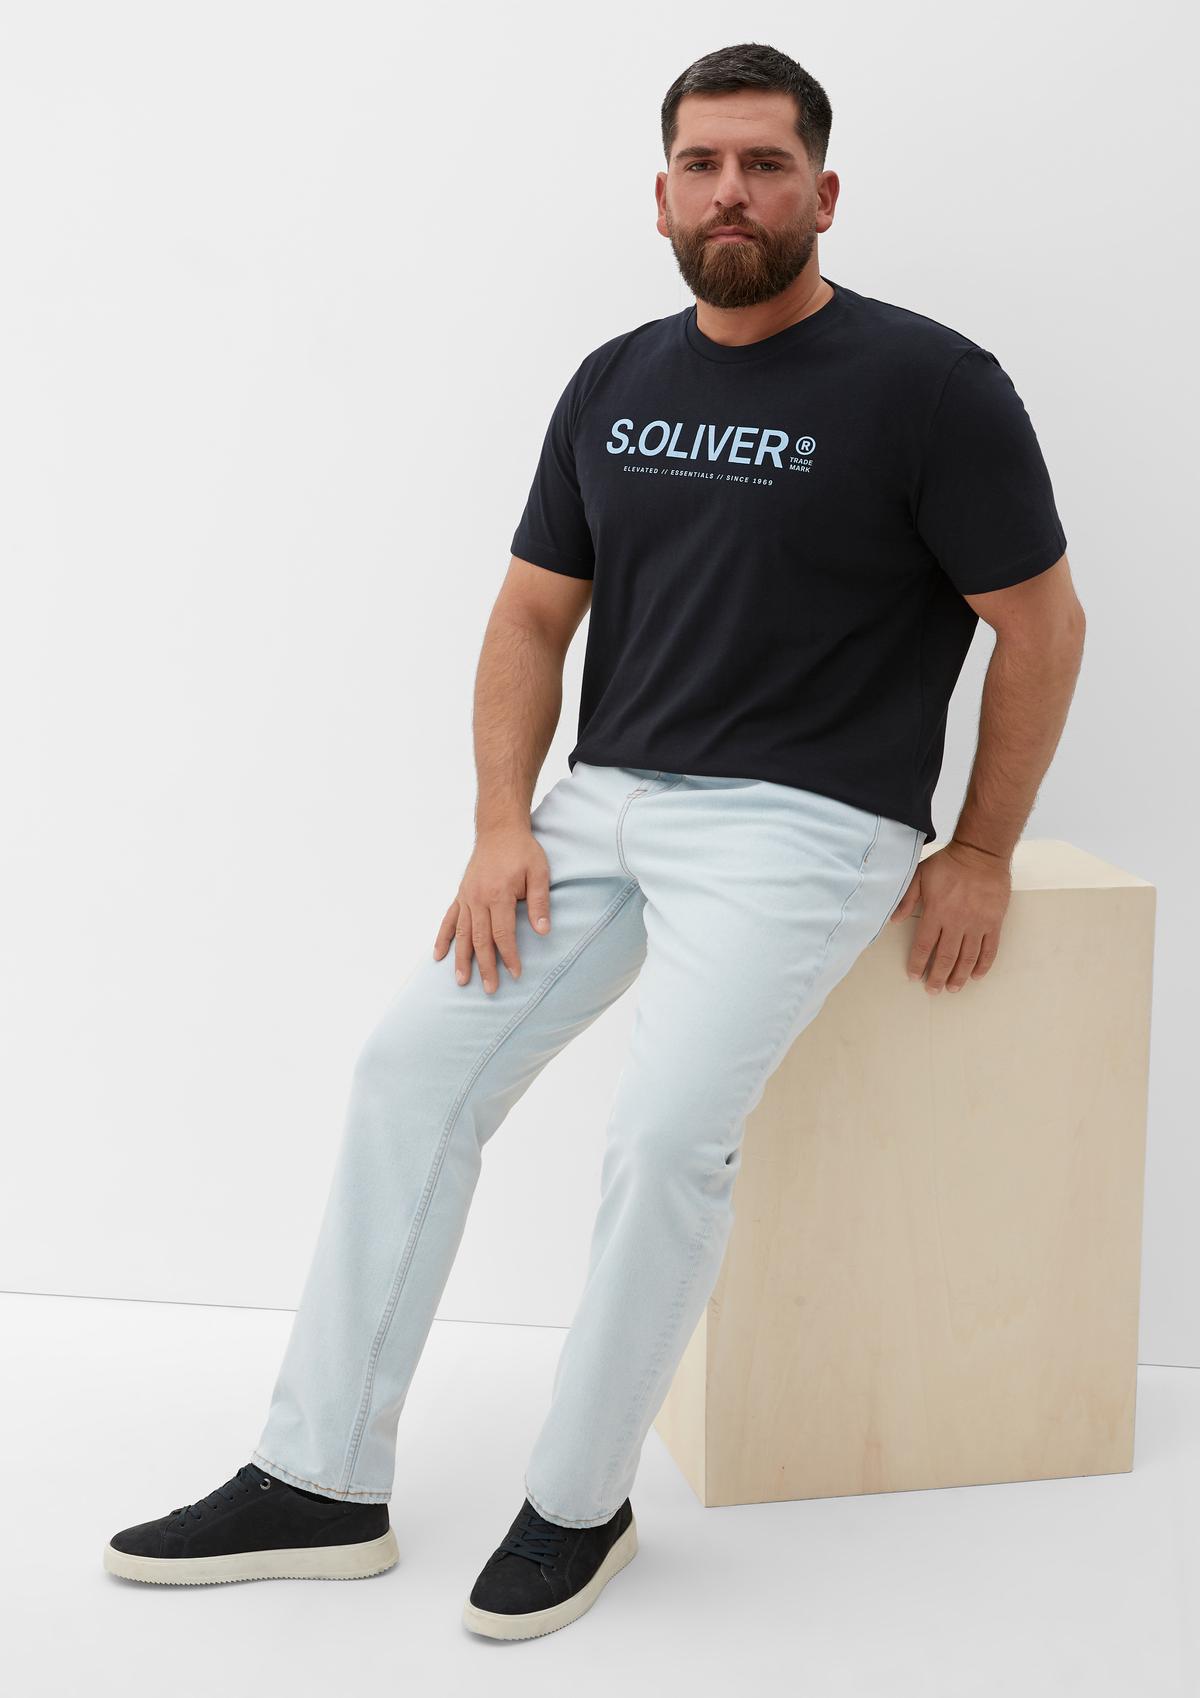 s.Oliver Jeans Casby / relaxed fit / mid rise / straight leg